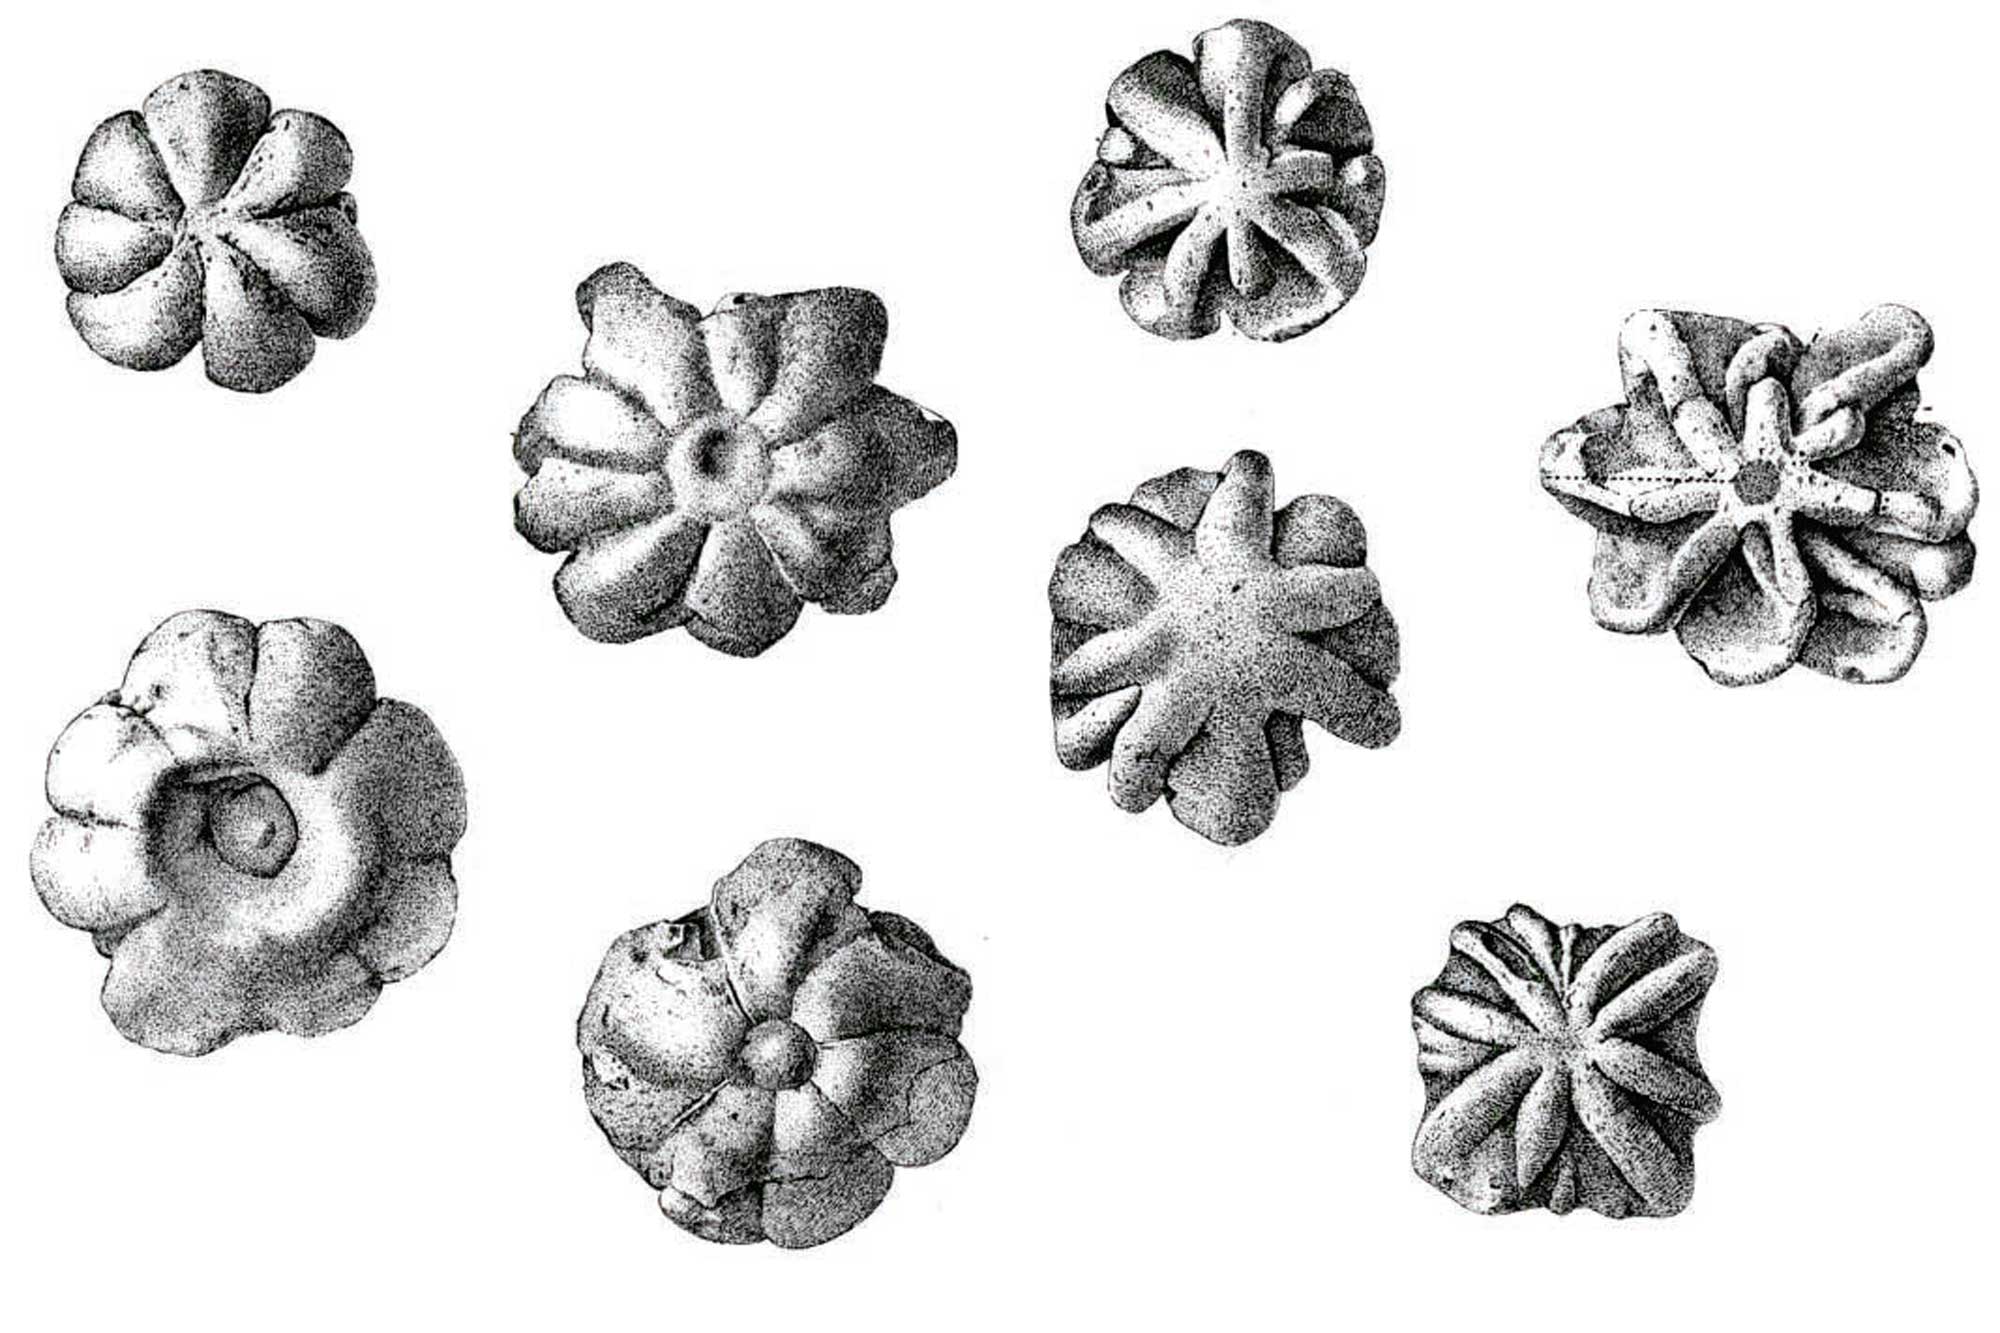 Drawings of star cobbles, genus Brooksella, from an 1898 monograph by Walcott.